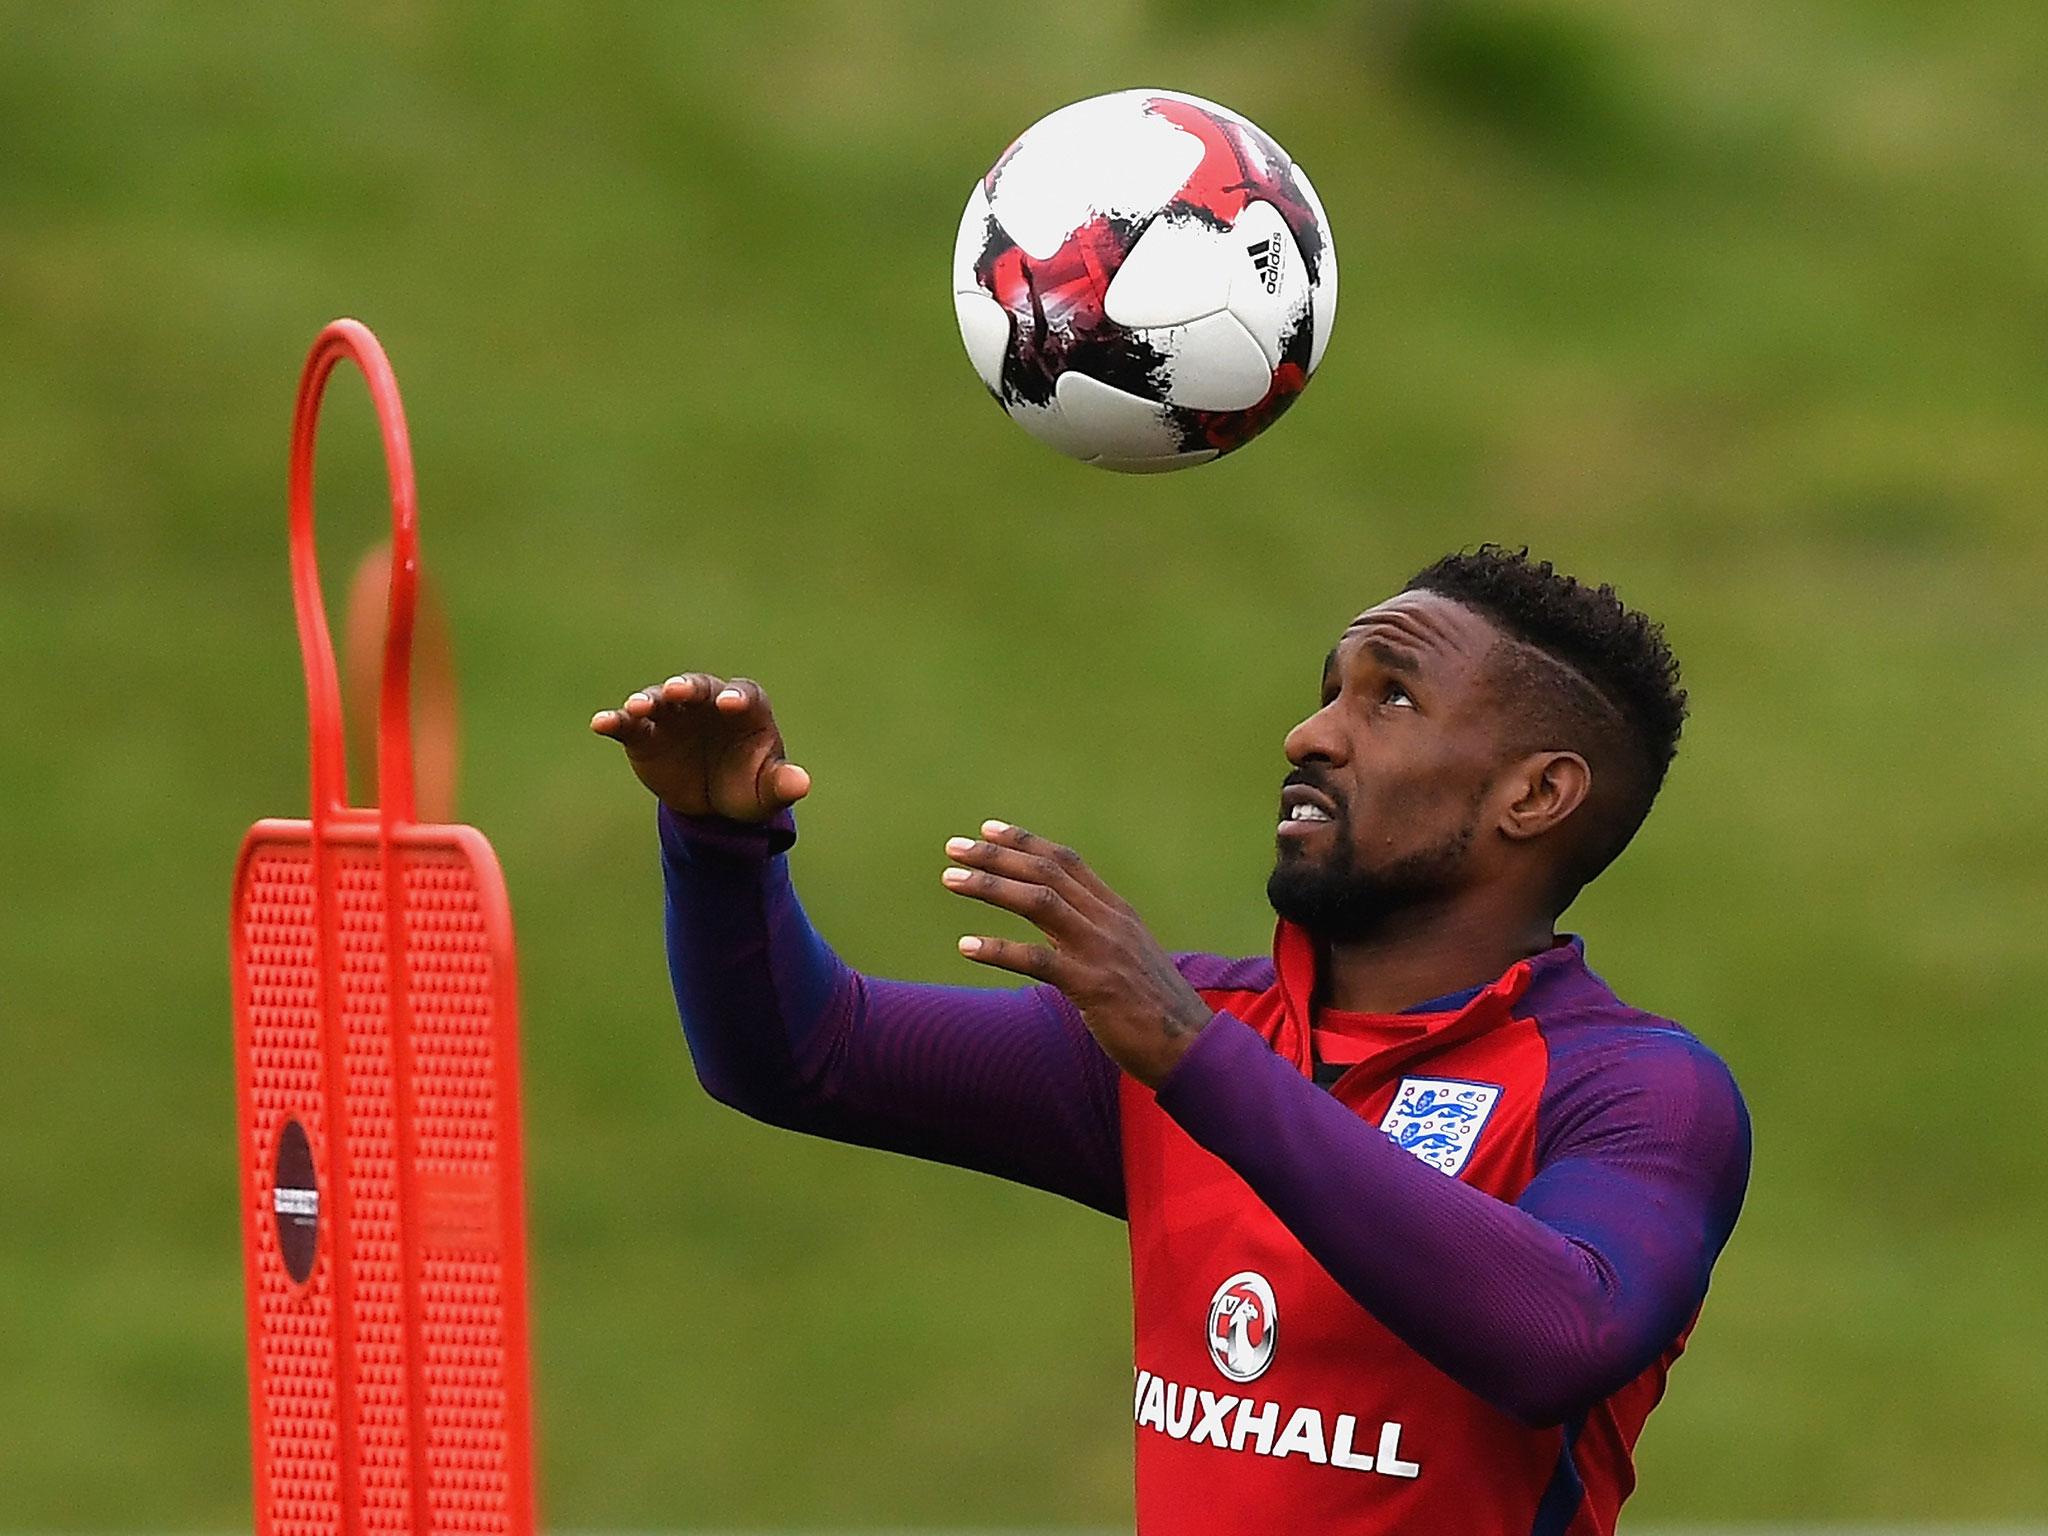 Defoe in training with the England squad earlier this week